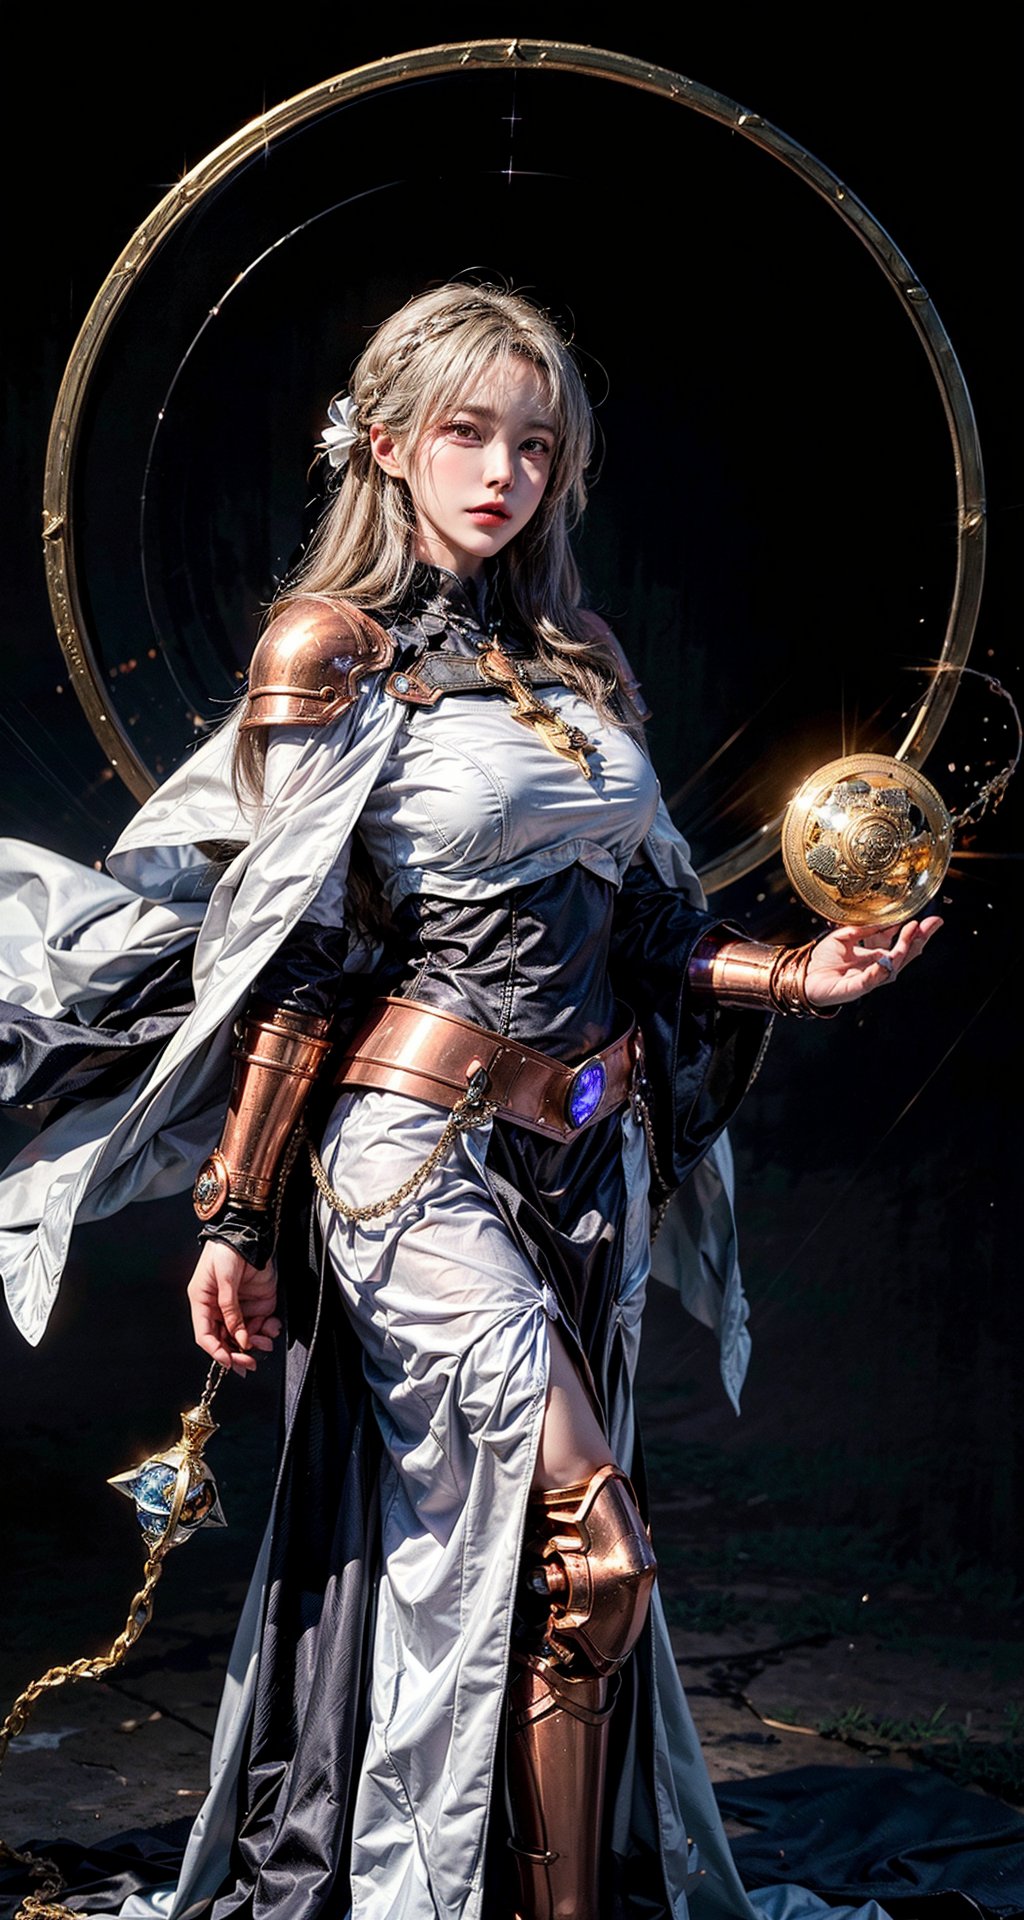 Female Paladin wearing white gold Chain Shirt Armor with Moonlit Edges , Copper Alchemist Robe with Transmutation Circles: Transmutation circles are intricately woven into the fabric, representing alchemical knowledge, (Tallow,Vessel color background:1.3), kisara,mecha musume,kongming suit,feh